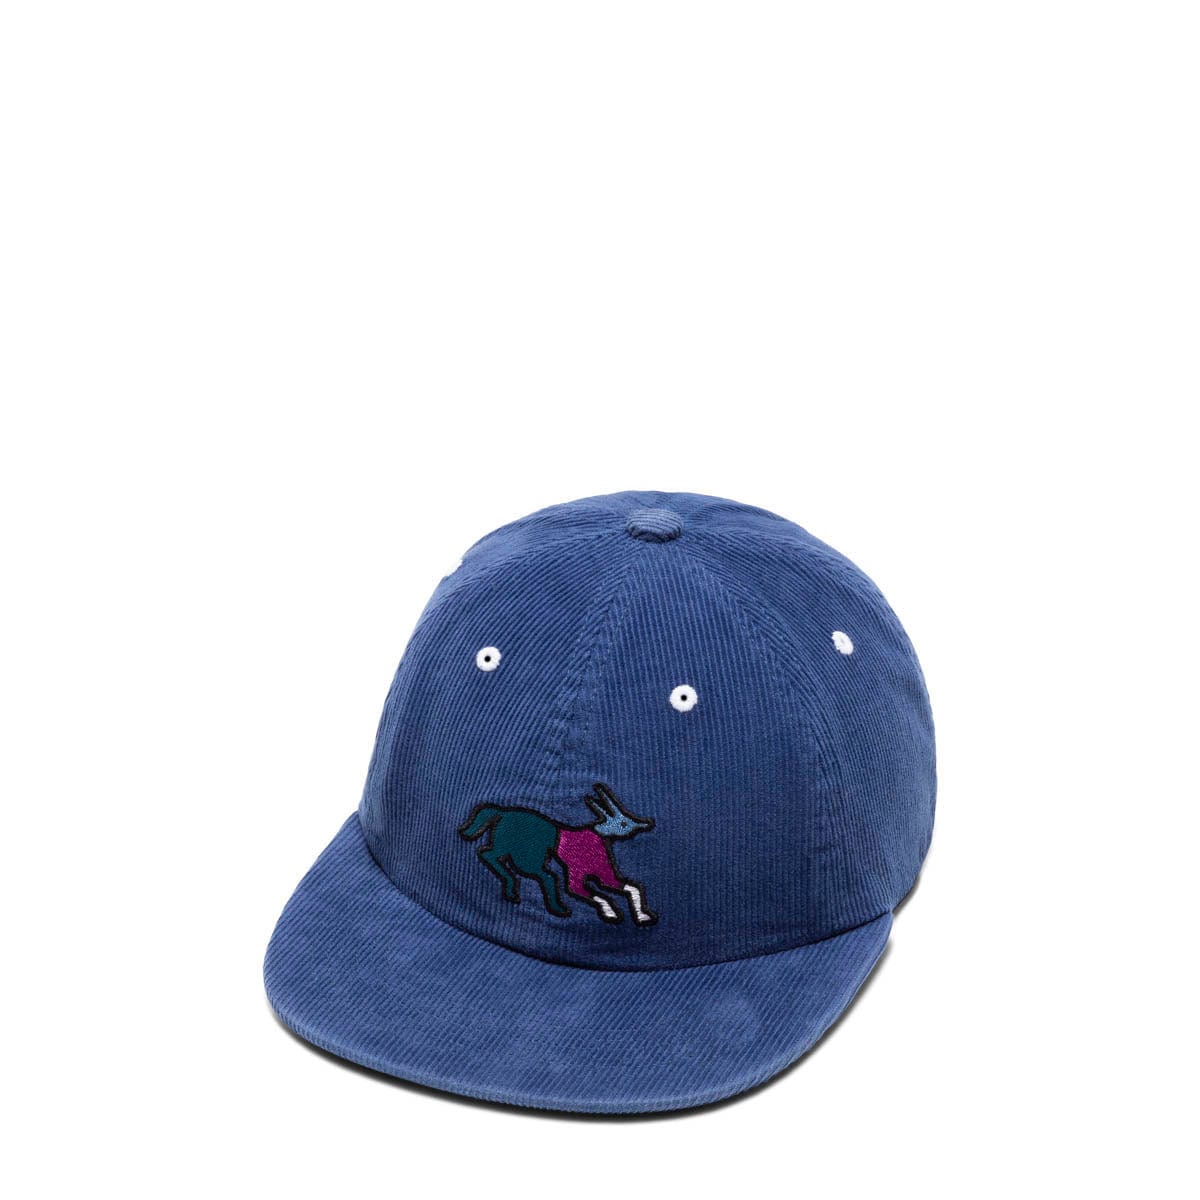 By Parra Headwear BLUE / O/S / 49155 ANXIOUS DOG 6 PANEL HAT